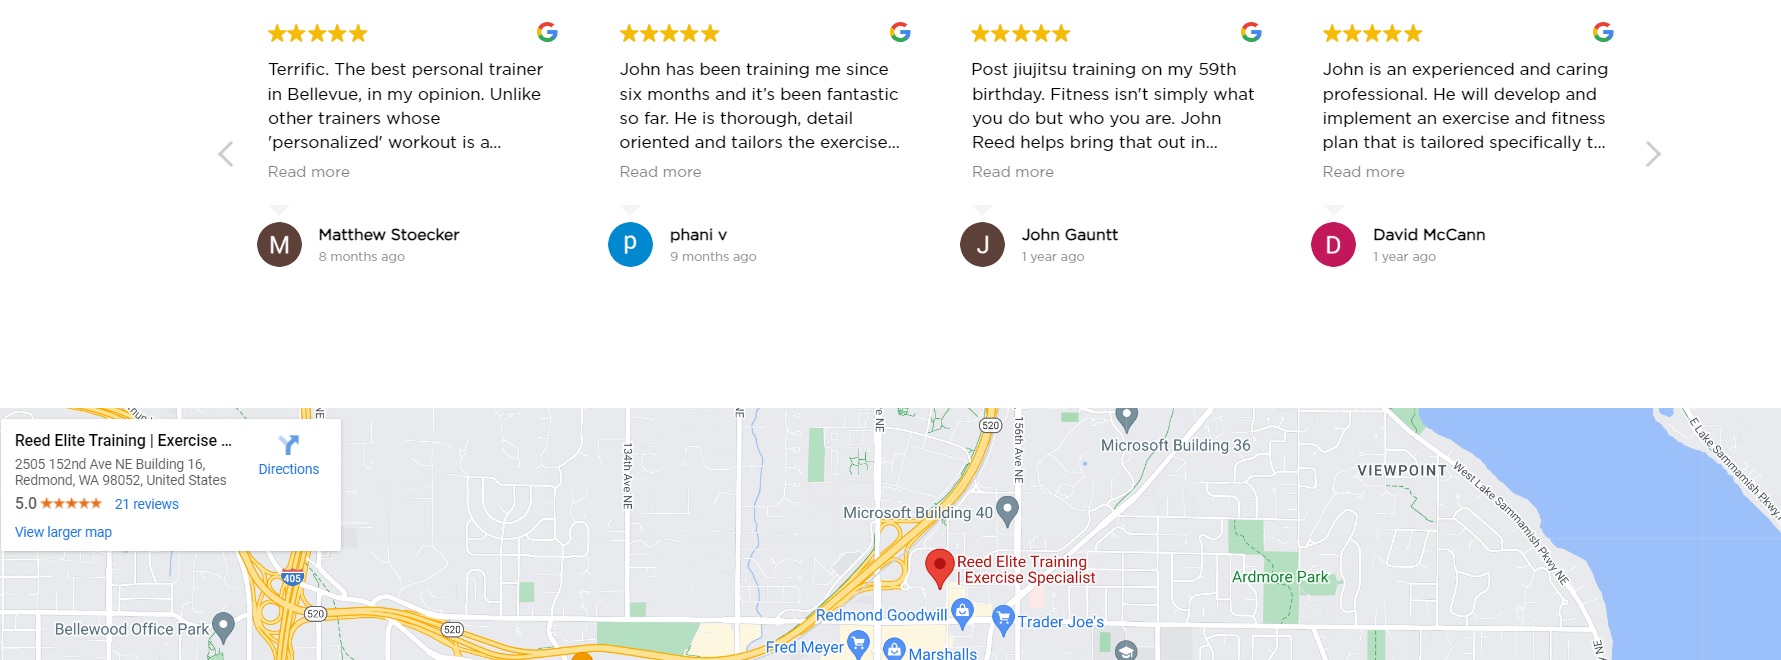 location and client reviews